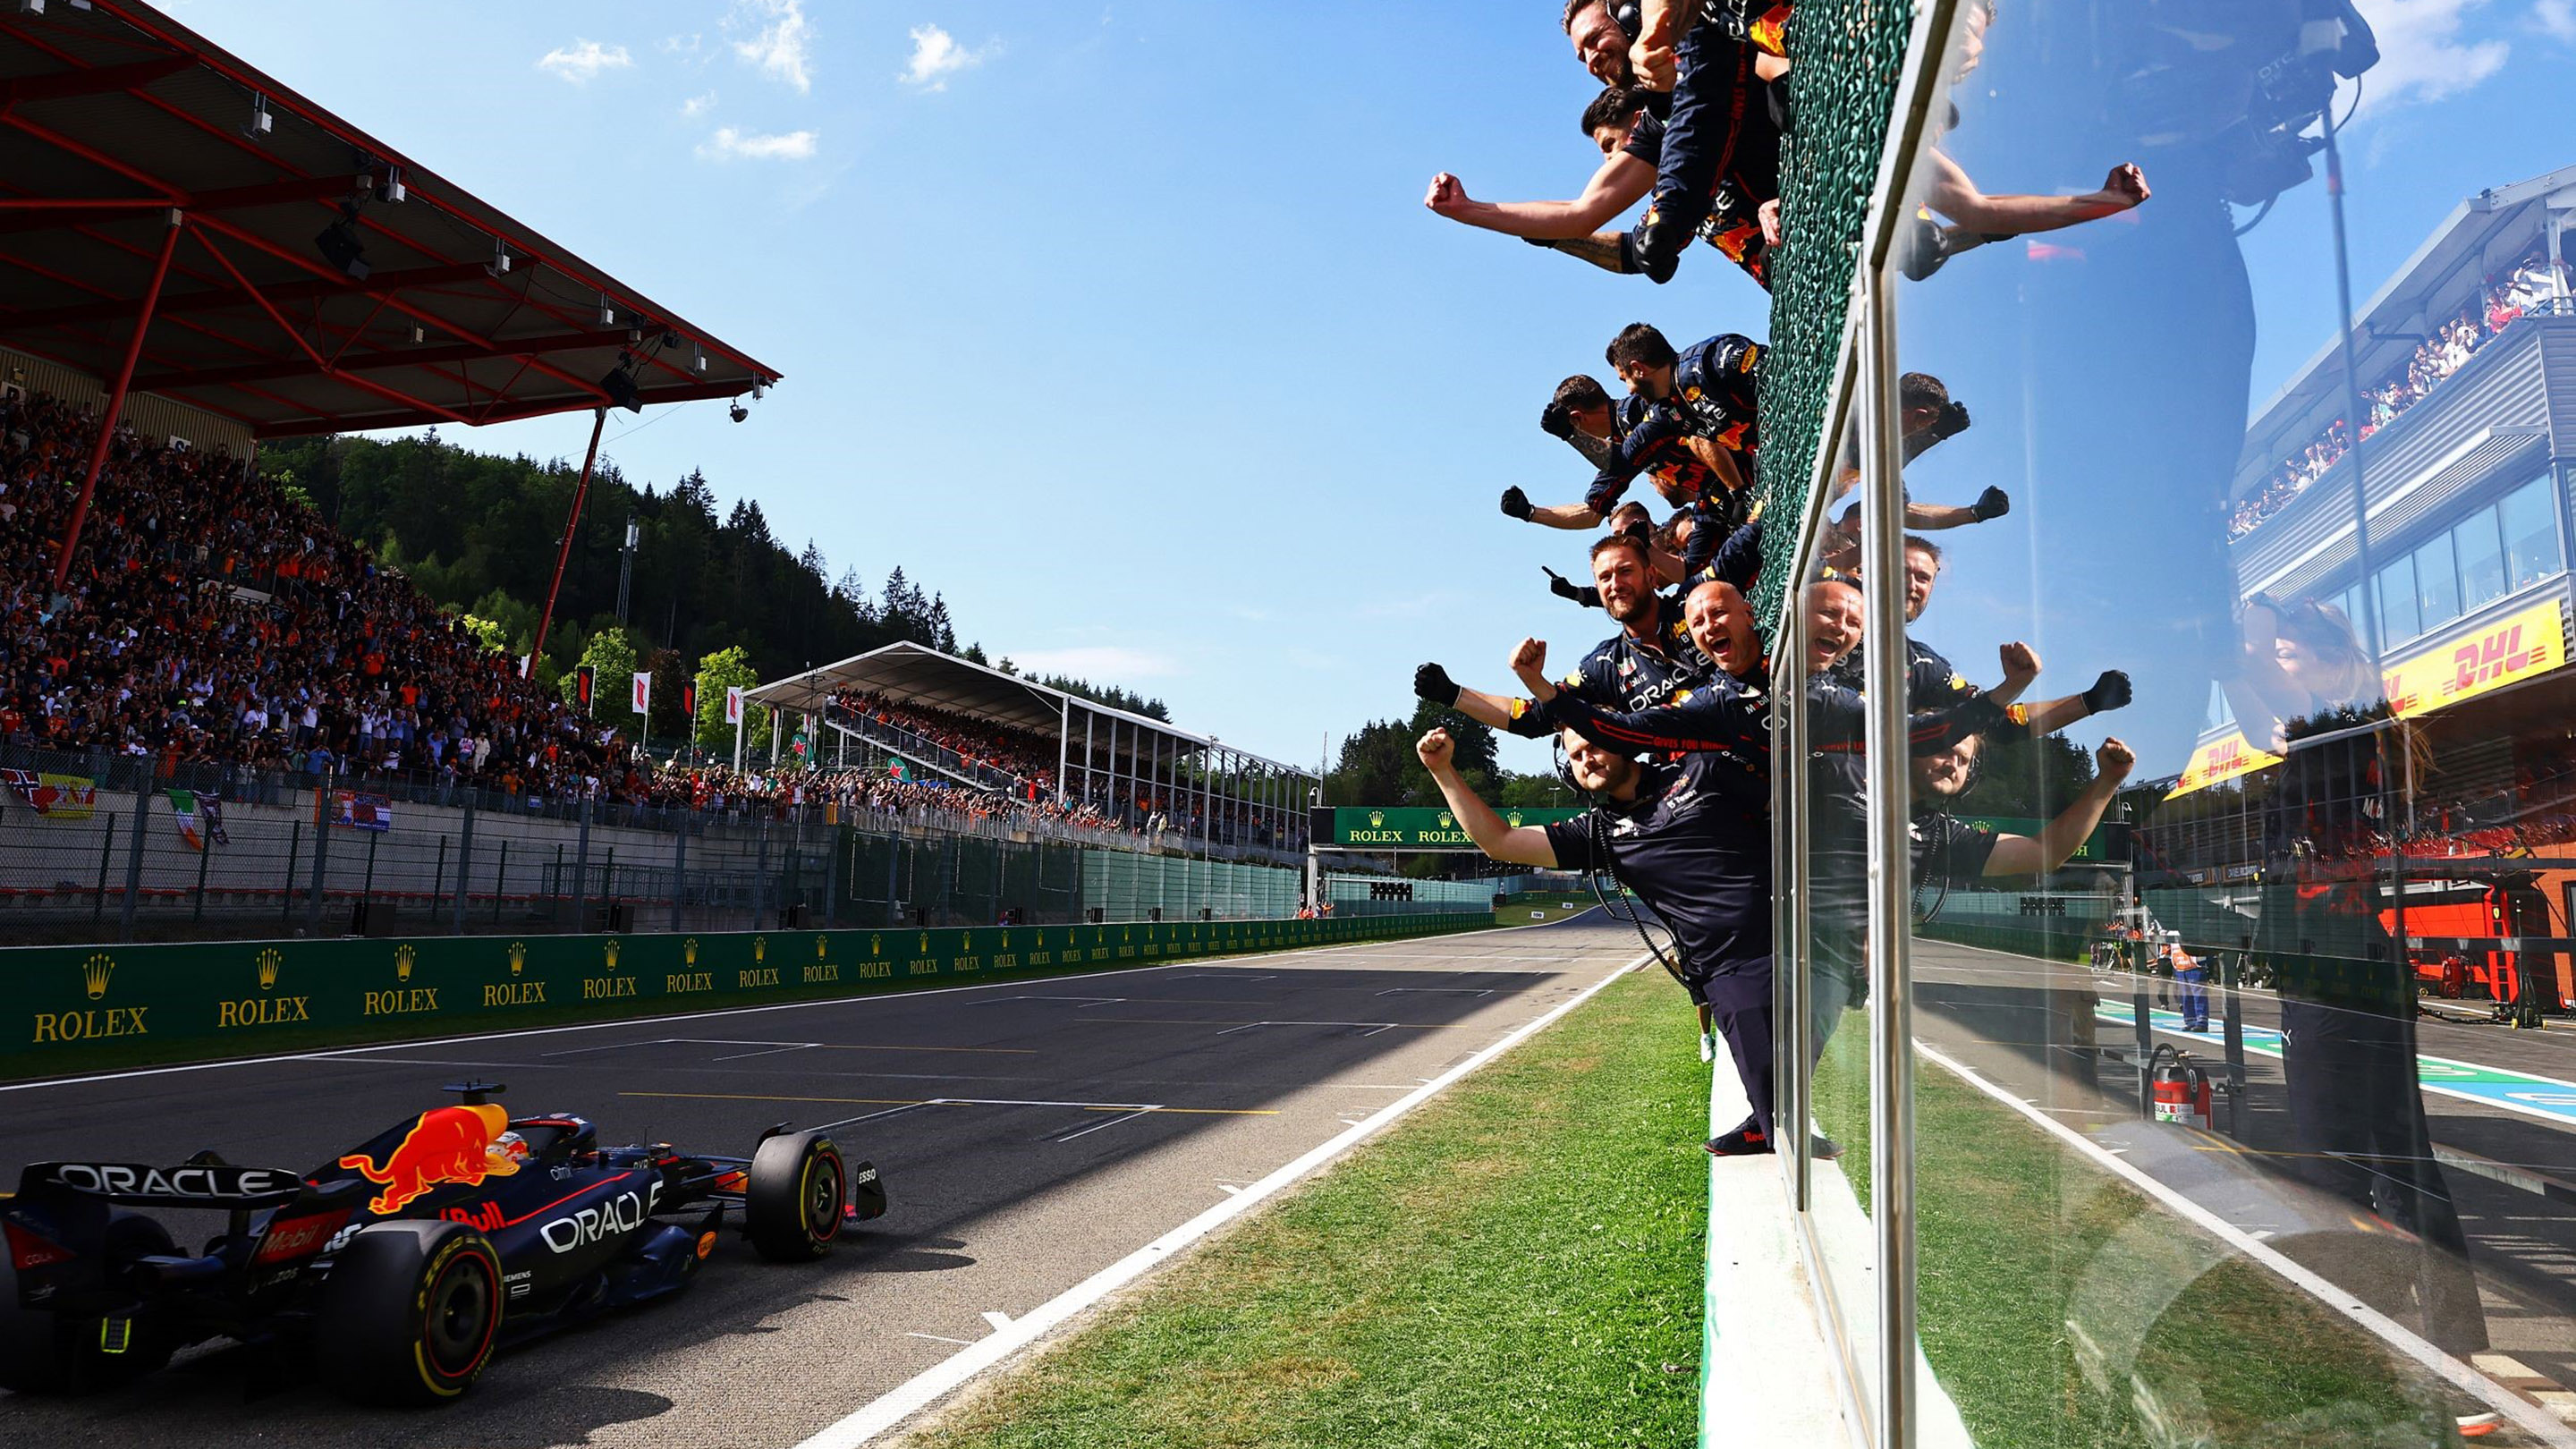 SPA, BELGIUM - AUGUST 28: The Red Bull Racing team celebrate on the pitwall during the F1 Grand Prix of Belgium at Circuit de Spa-Francorchamps on August 28, 2022 in Spa, Belgium. (Photo by Mark Thompson/Getty Images)